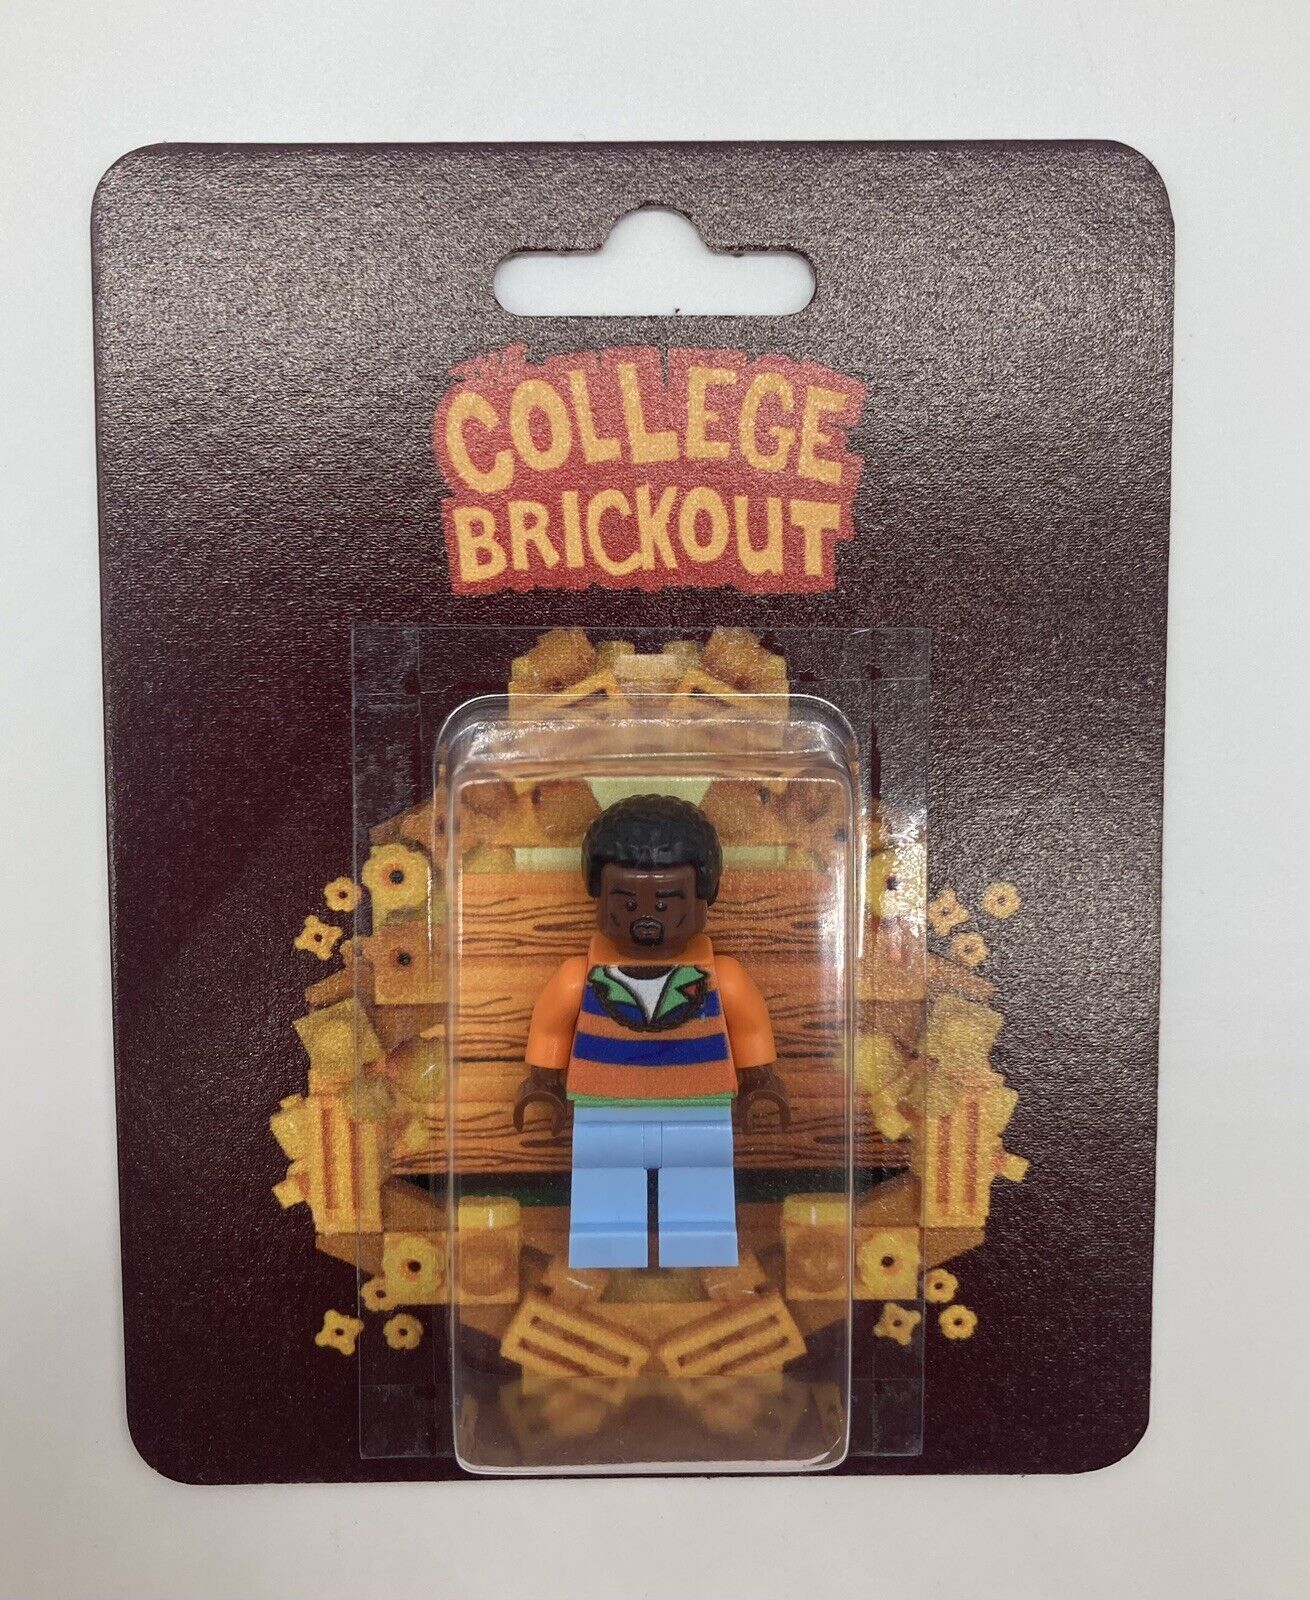 The Canvas Don “The College Brickout” Kayne LEGO Minifigure